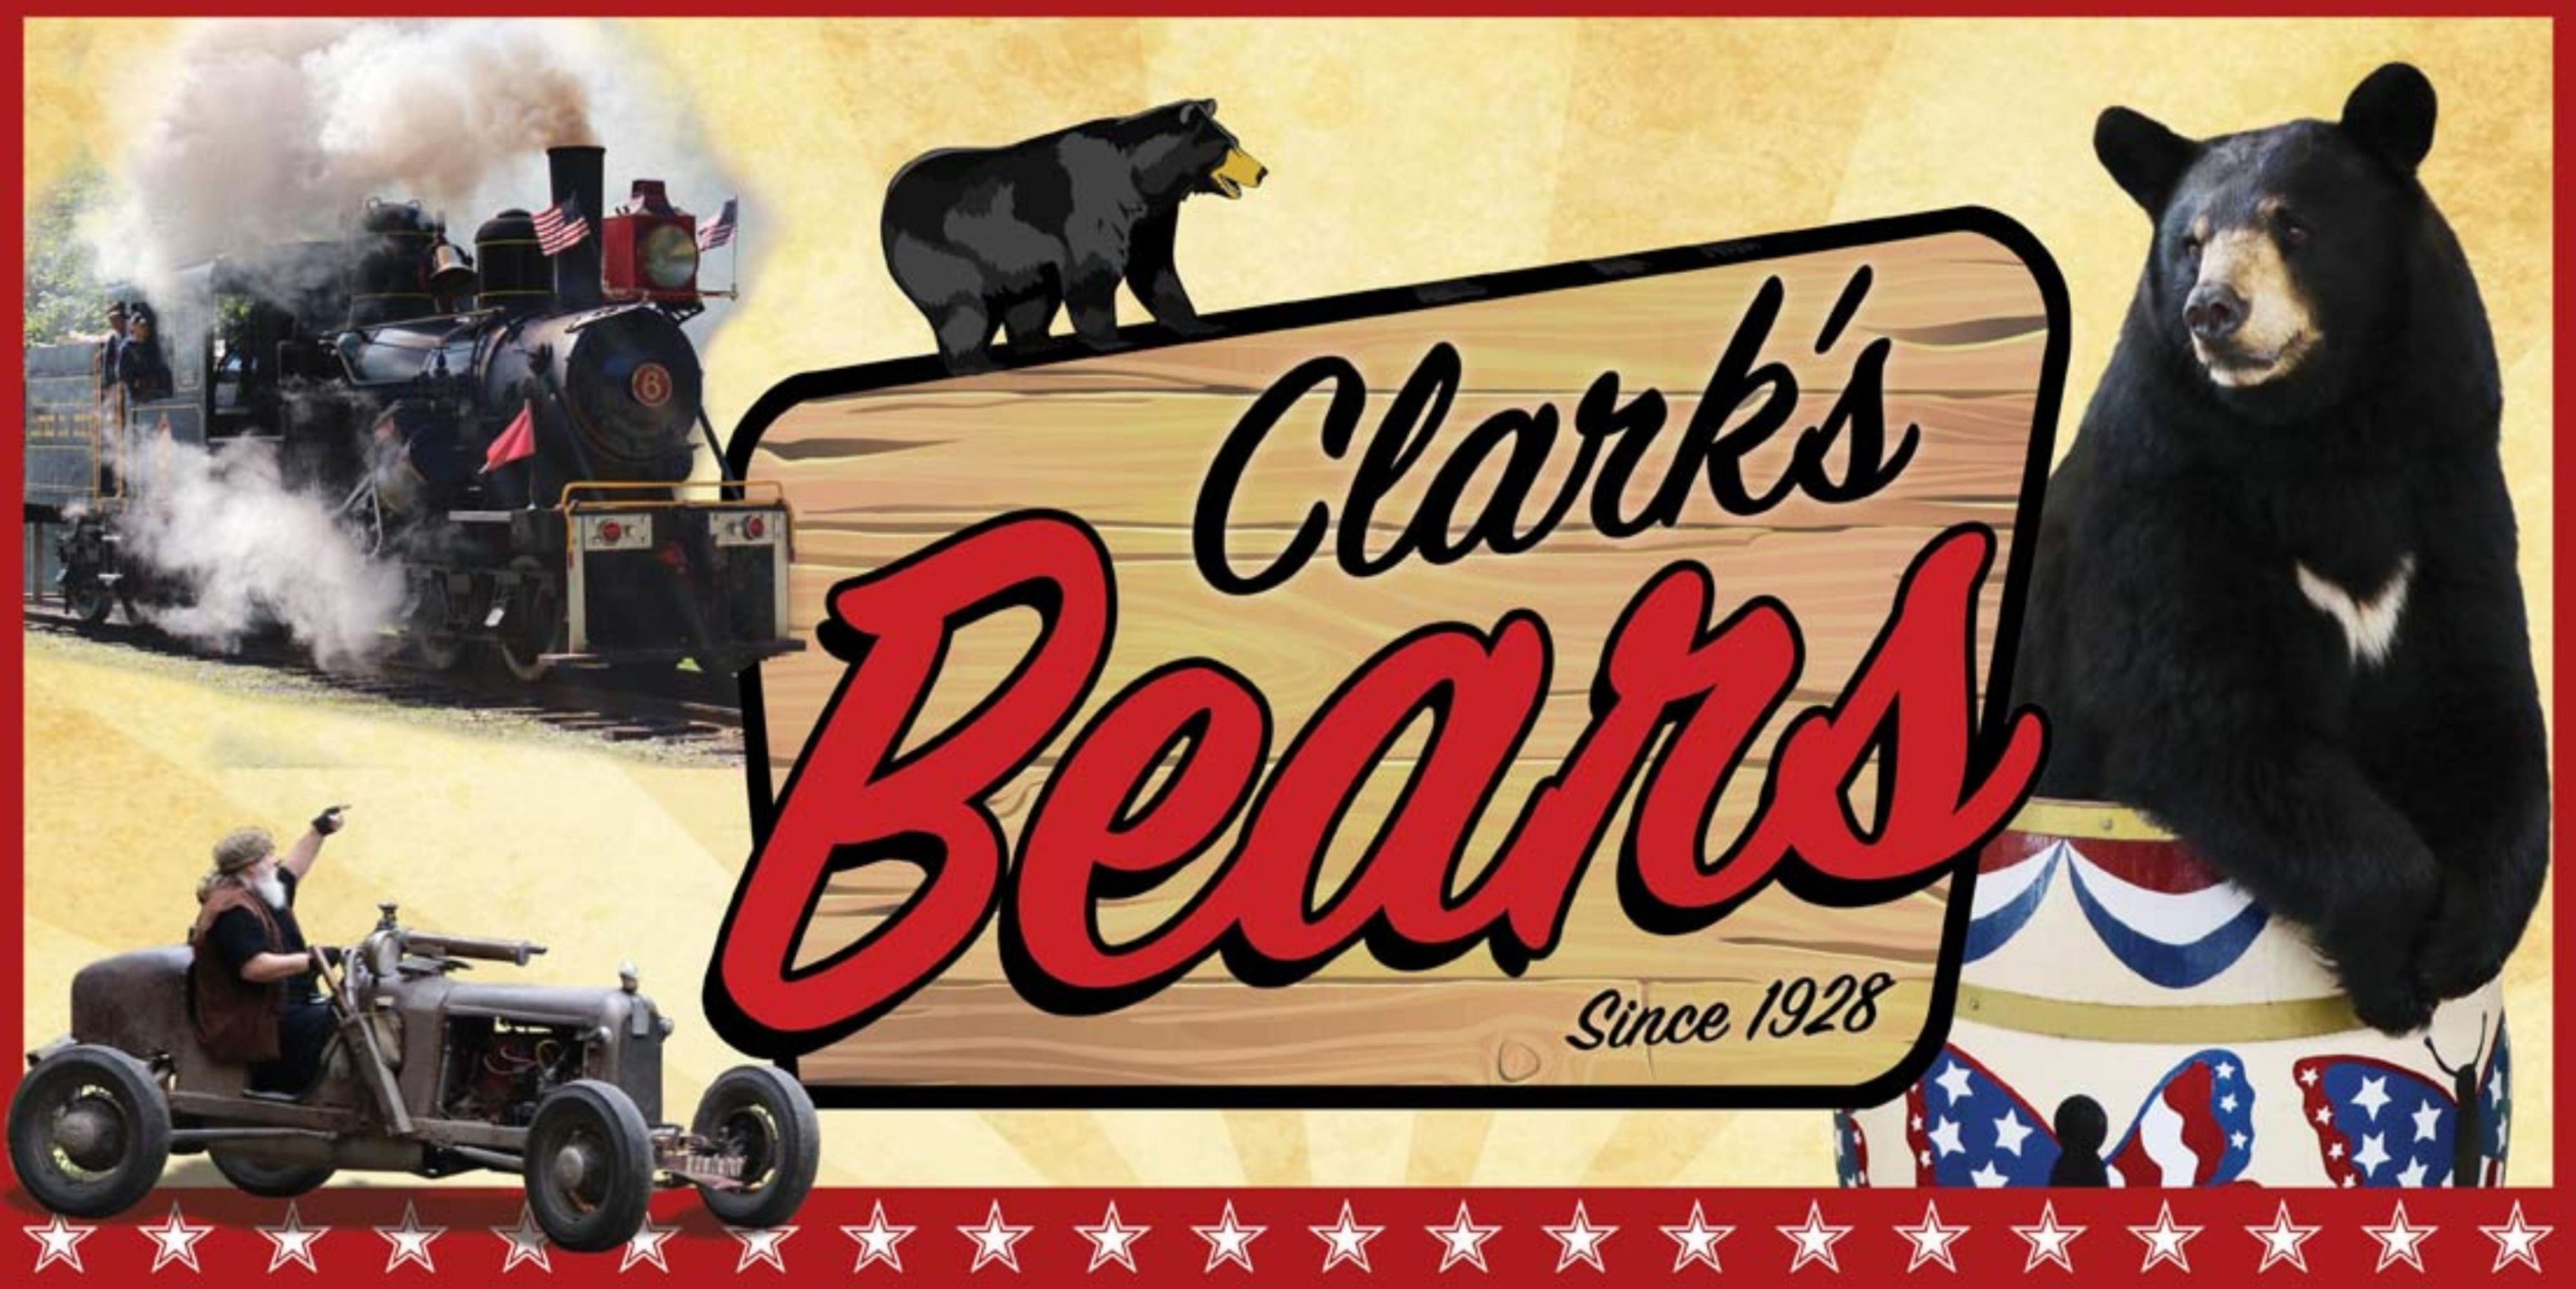 Since 1928 this family friendly theme park has welcomed young and old alike. See trained bears perform along with circus acts, attraction rides, museums celebrating yester-year, large gift shop and of course a train ride into "Wolfman" territory. Open May-Oct.  